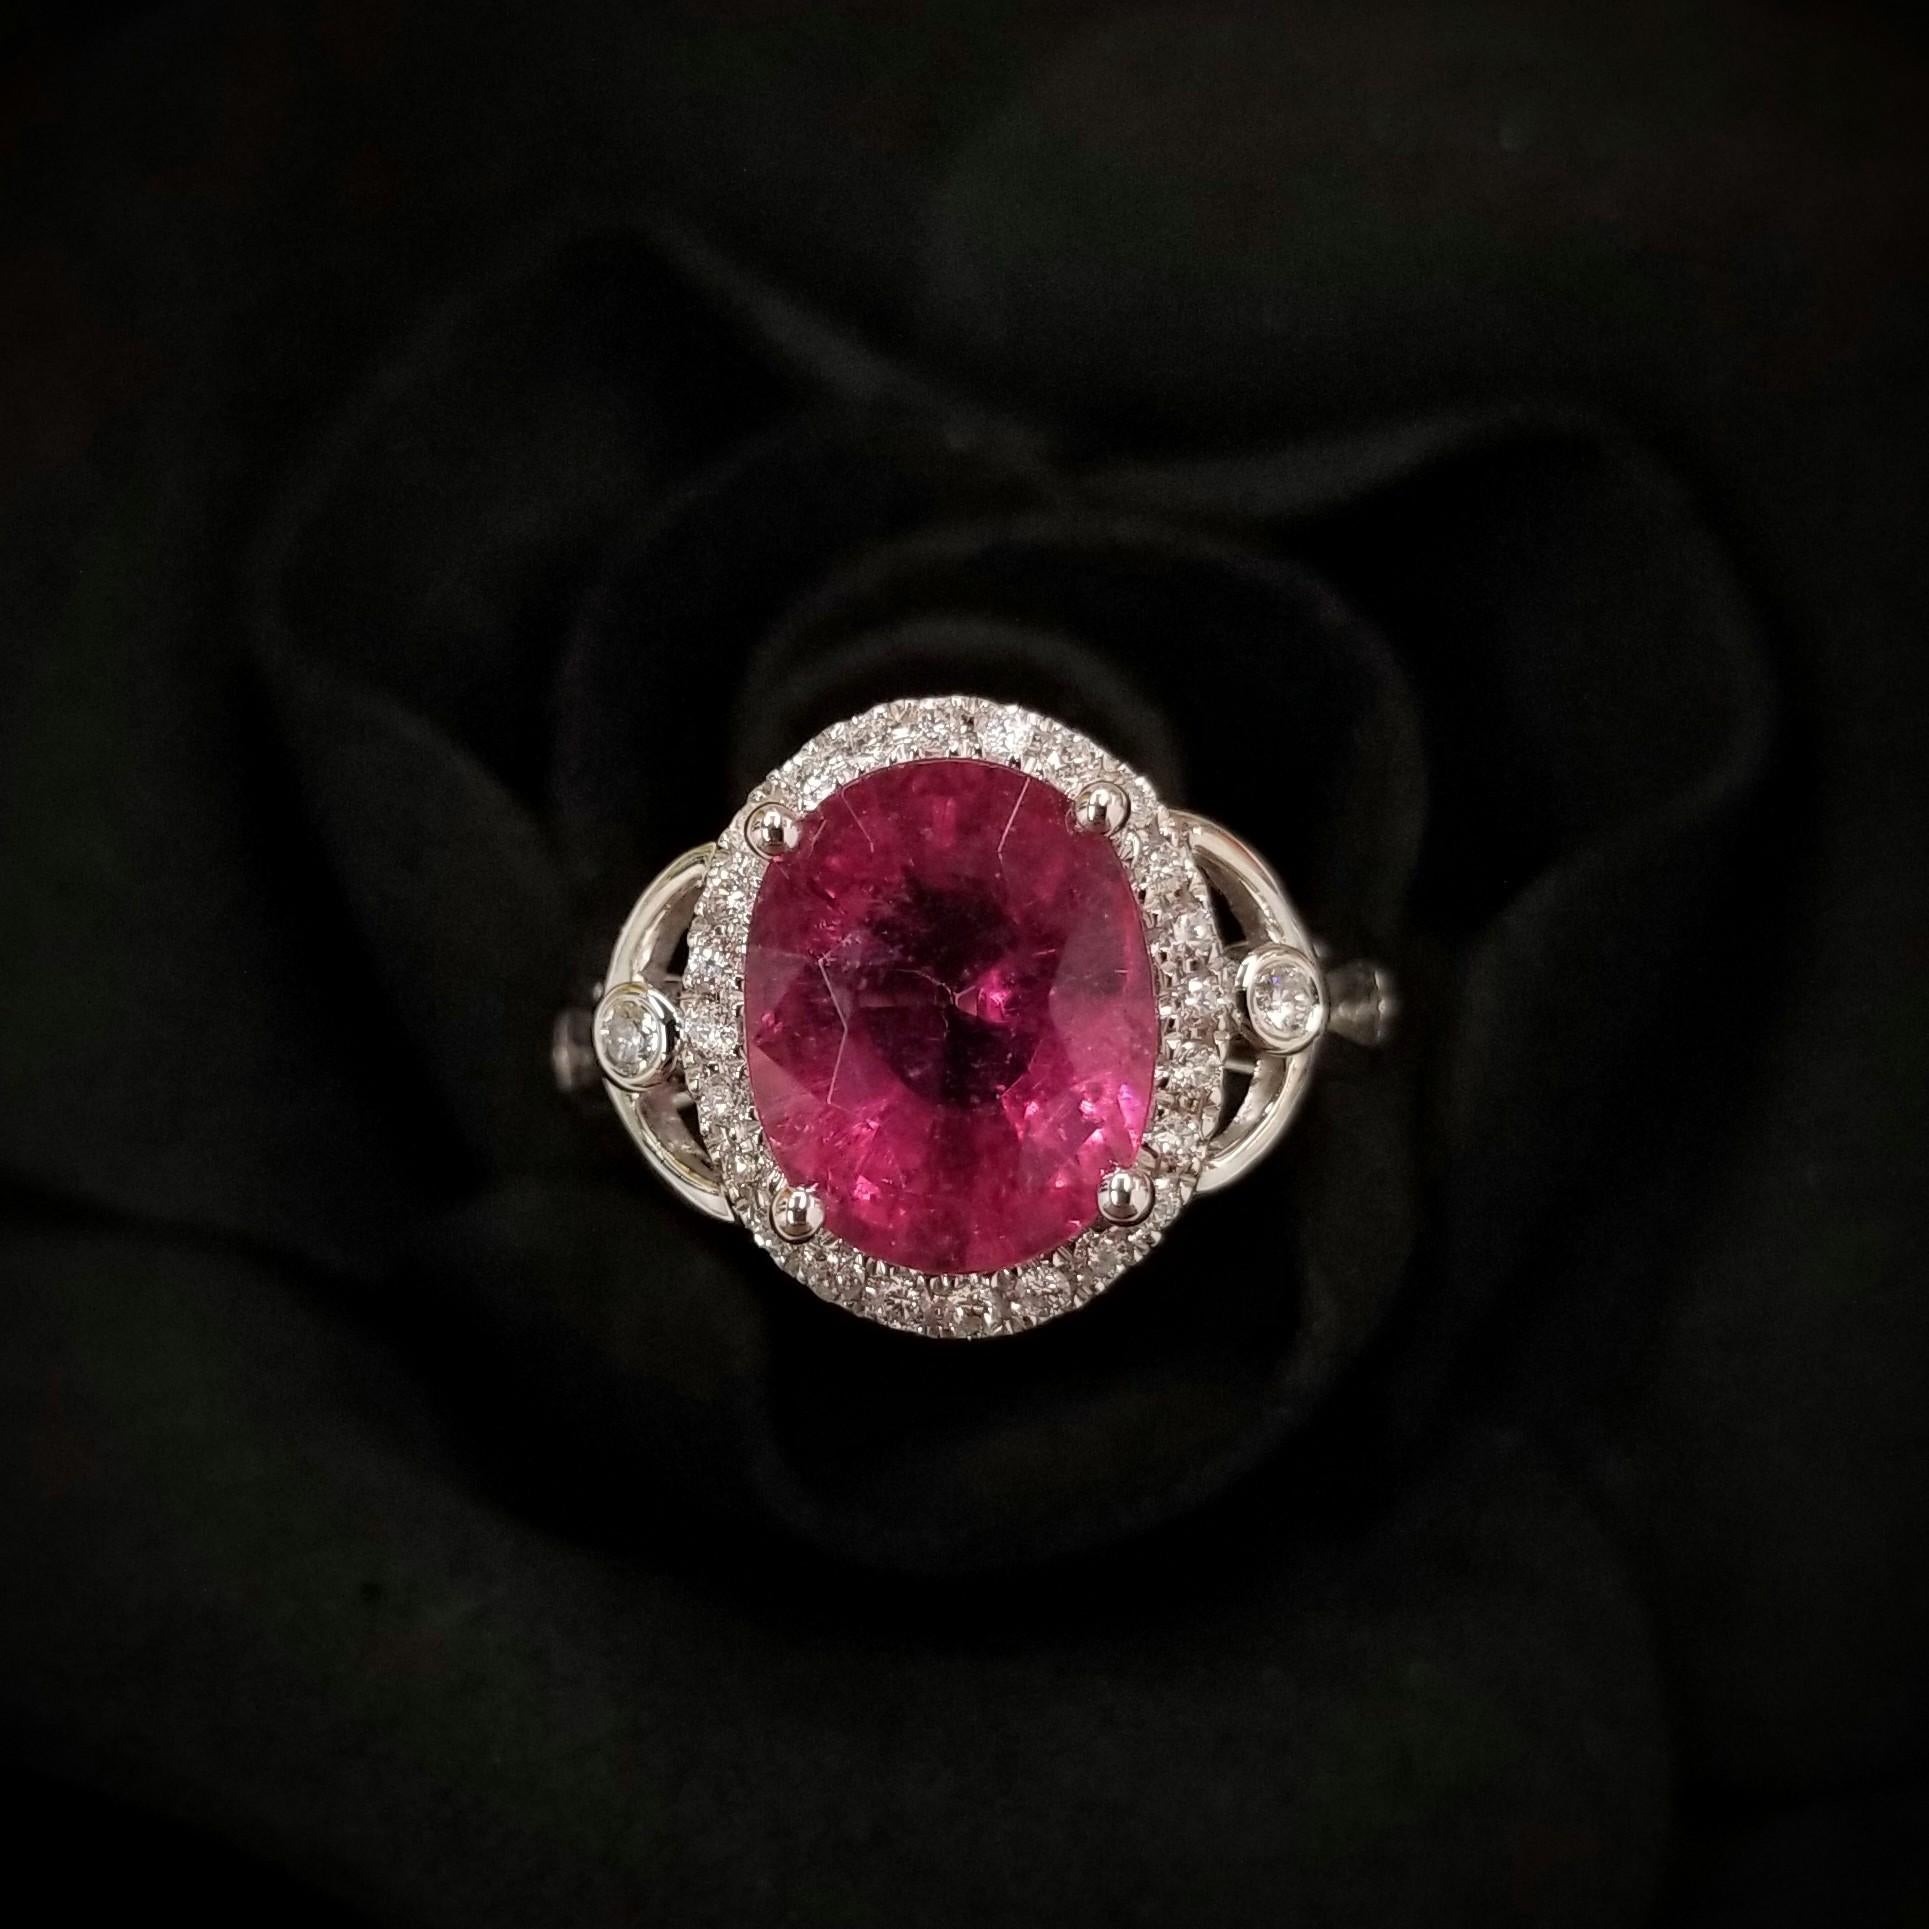 Introducing a breathtaking piece of jewelry featuring a dazzling IGI Certified 3.22 Carat Tourmaline in a striking vivid purplish pink color. The oval-shaped tourmaline takes center stage in this modern style ring crafted from 18K White Gold and is